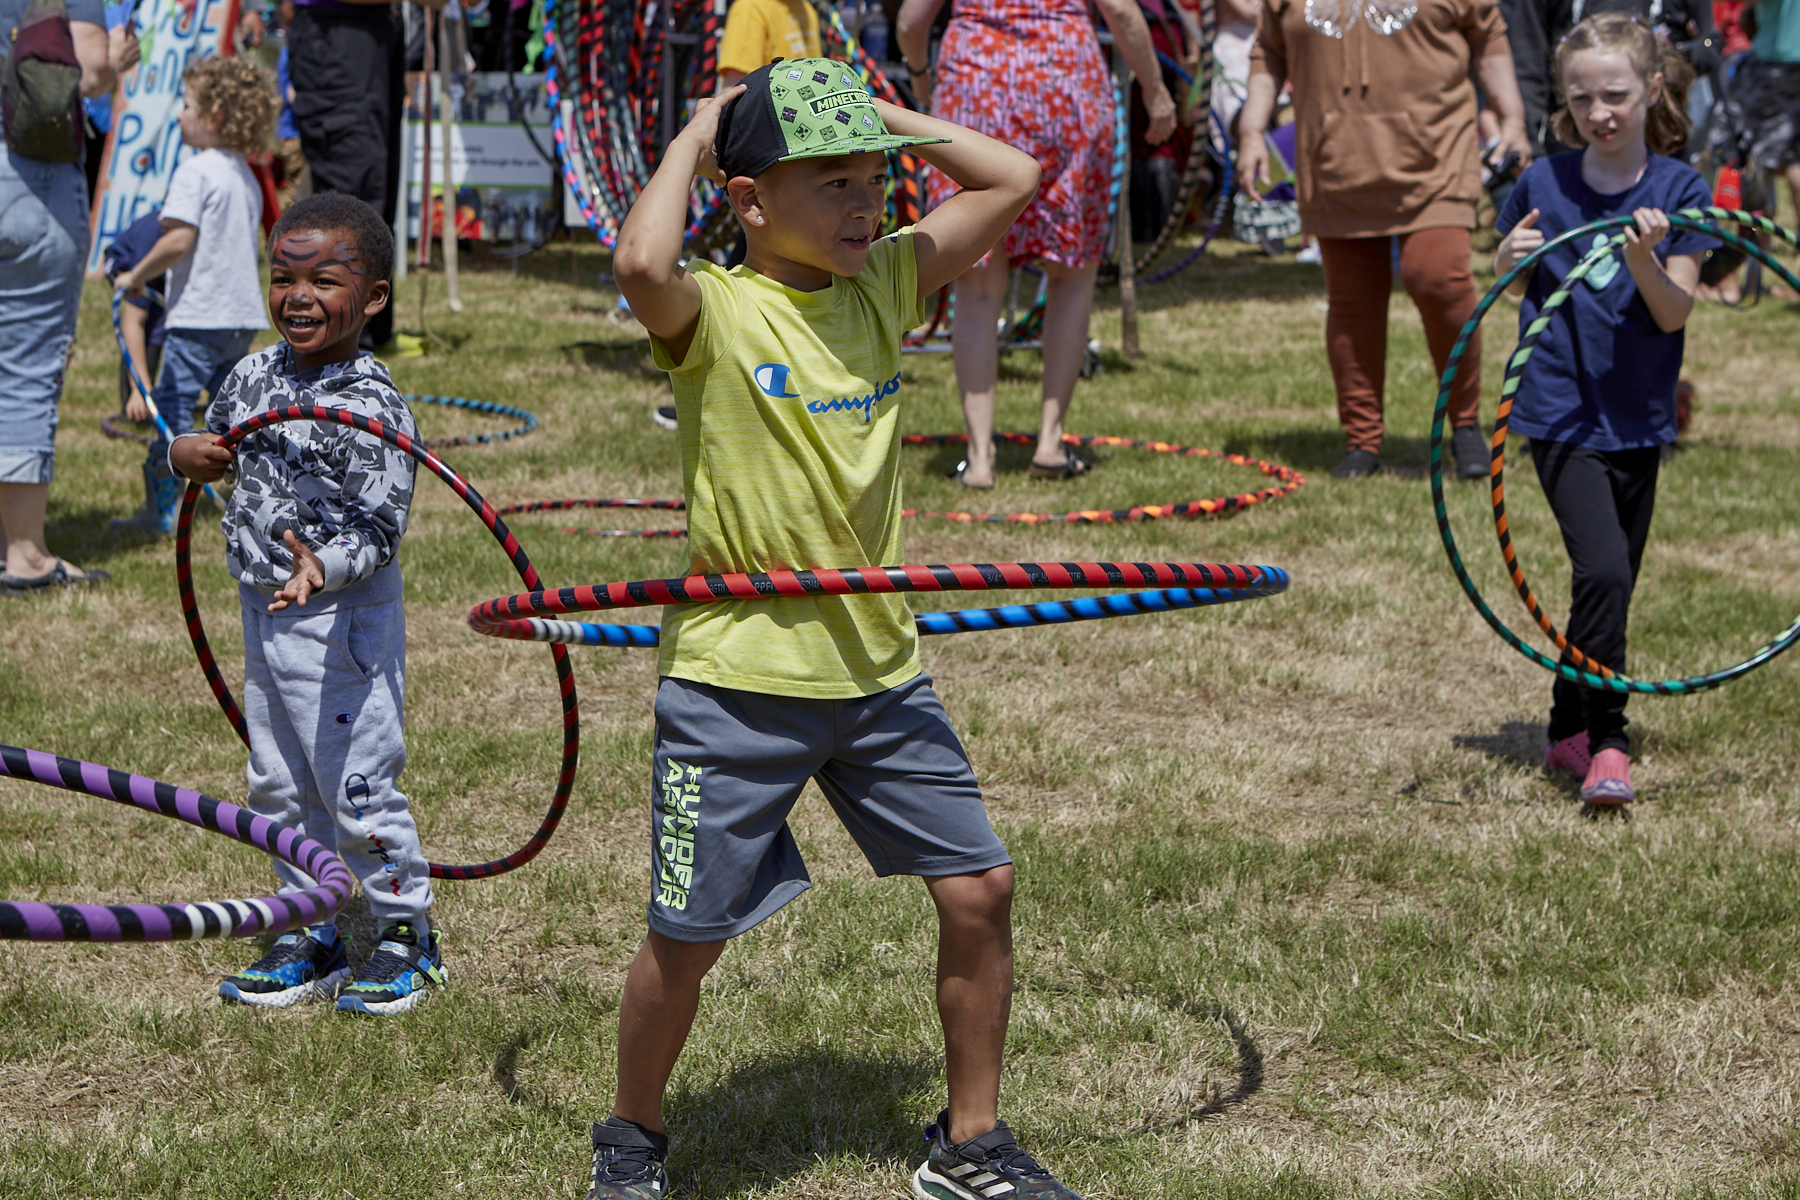 Photo from L to R: small boy with tiger face paint is holding a hoop; center - boy wearing a baseball cap is holding his arms above his head while hooping; R - a girl with pigtails carries 2 hula hoops